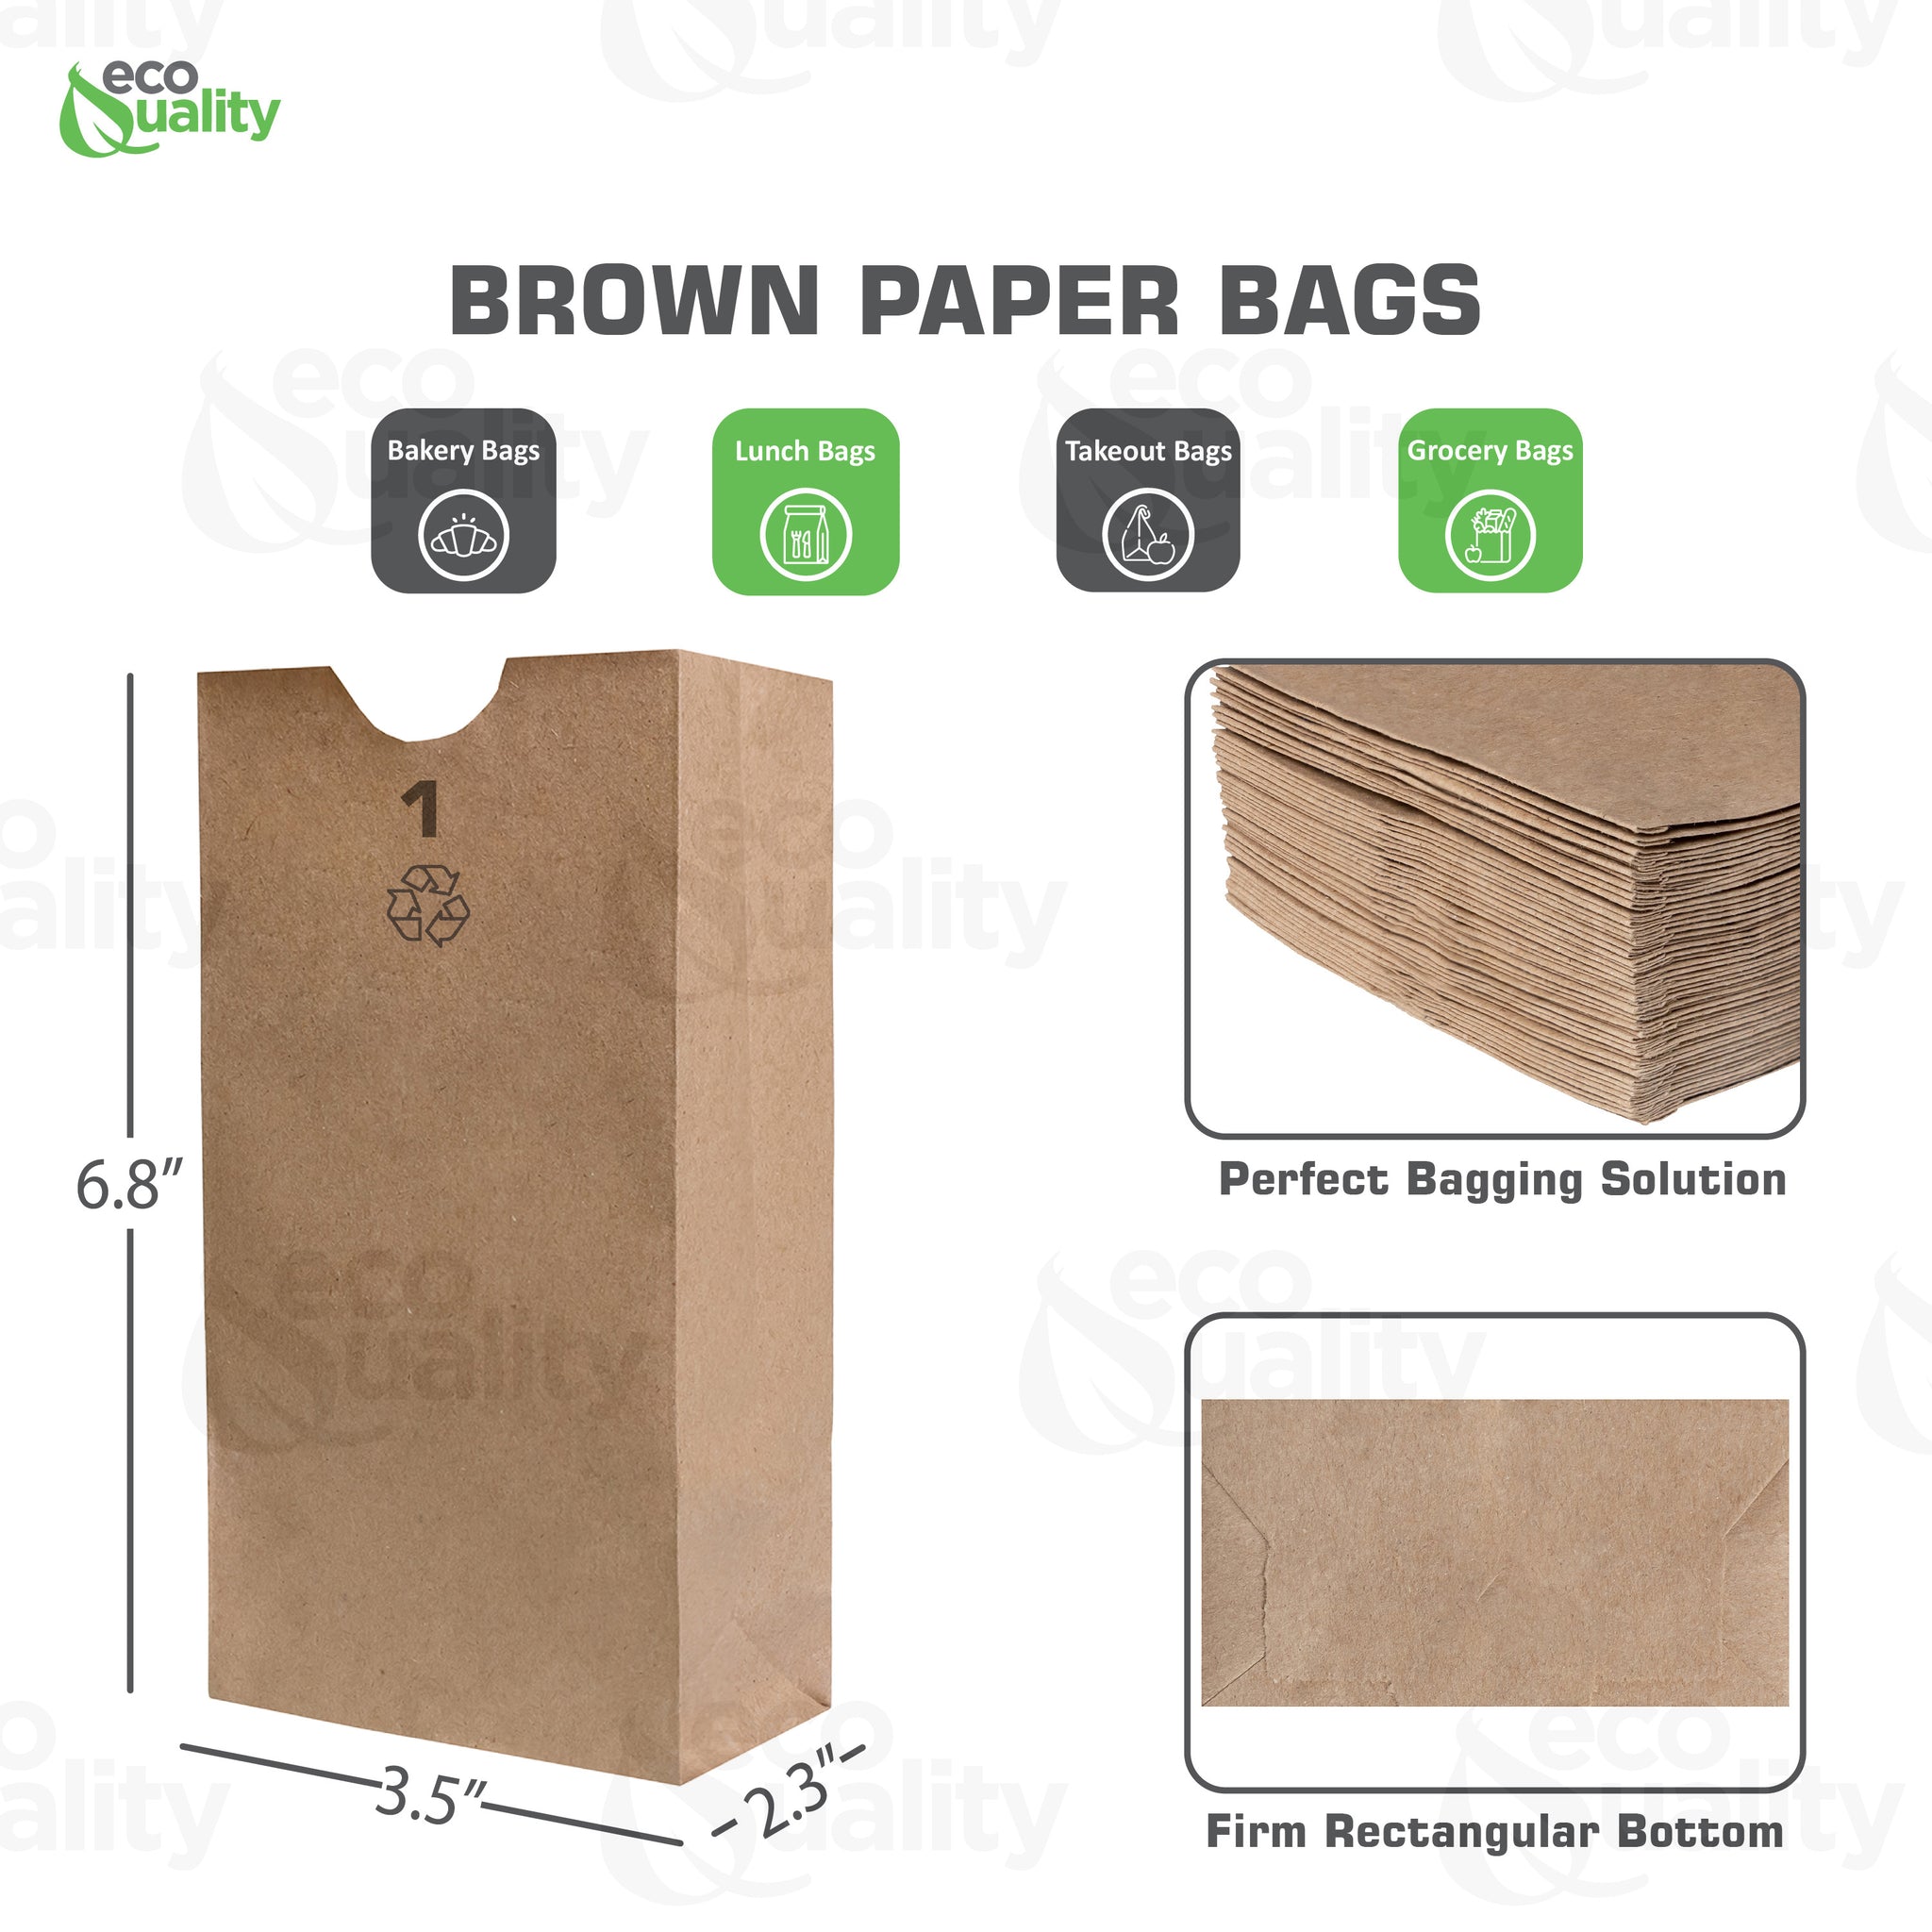 1 pound disposable bag BROWN Paper Bags white Paper Shopping Bags foldable paper bag catering bags white kraft paper bag 1 pound candy bag snack bag gift bags DIY Bags arts and craft Sandwich Bag brown paper bag party favor bag lunch bag togo bag takeout bag Restaurant supplies paper garbage bags Kraft Paper Bags kraft grocery bags Household Supplies